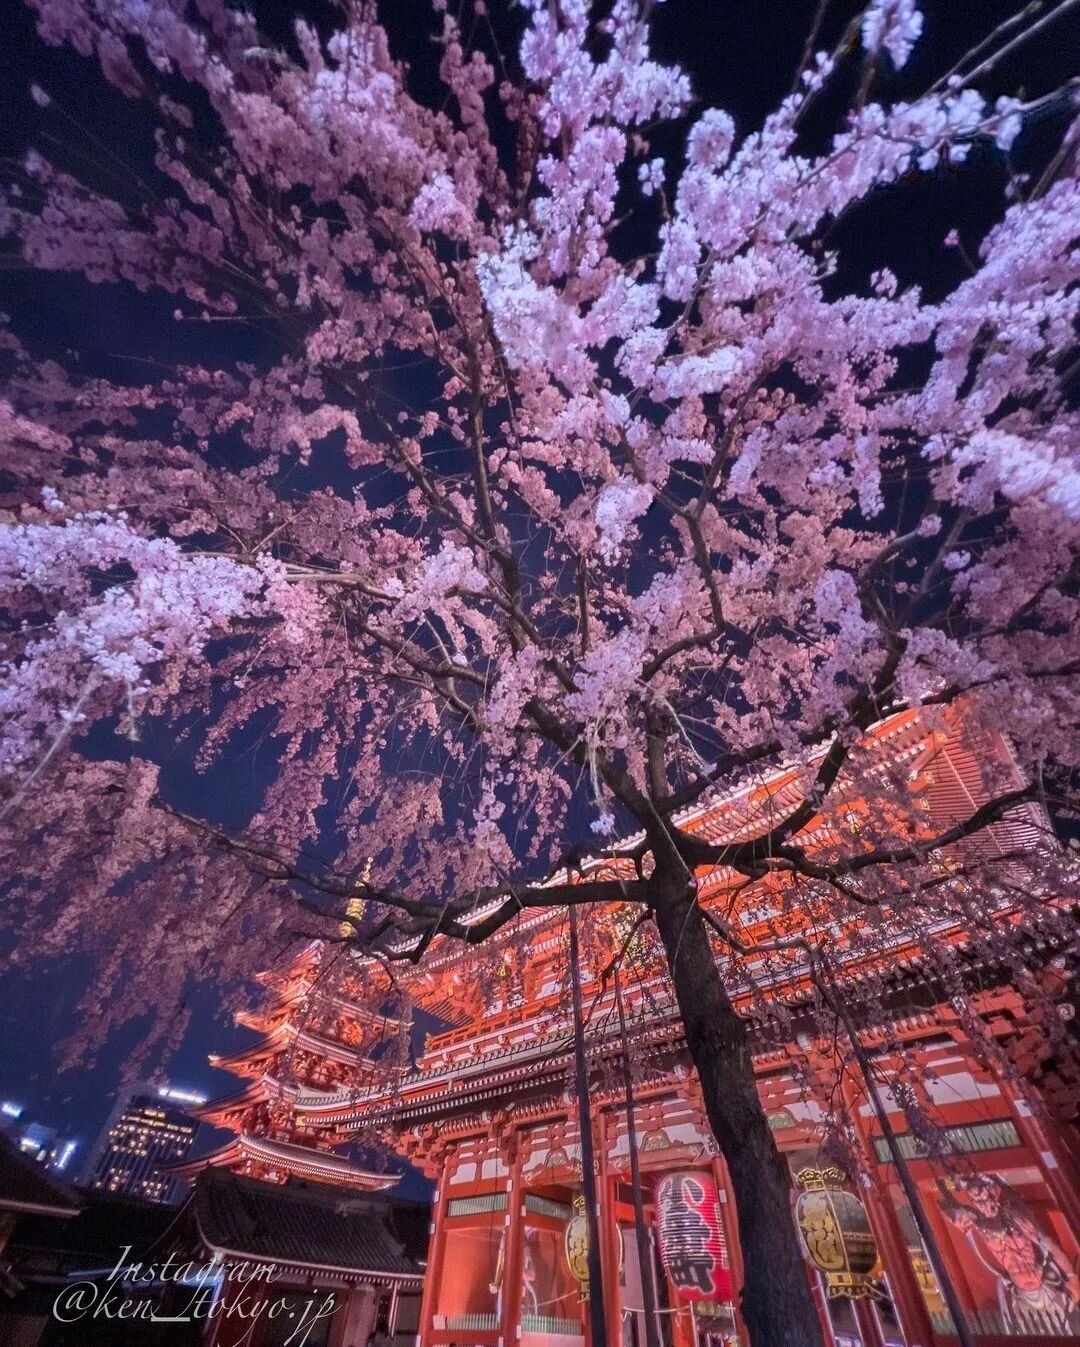 Spring has arrived in Tokyo! Anyone planning their trips to Tokyo for next year's cherry blossom season? 
&bull;&bull;&bull;
Reposted from @ken_tokyo.jp 
#japan #tokyo #traveljapan #traveltokyo #tourjapan #tourtokyo #tokyofood #japanese #instalike #i